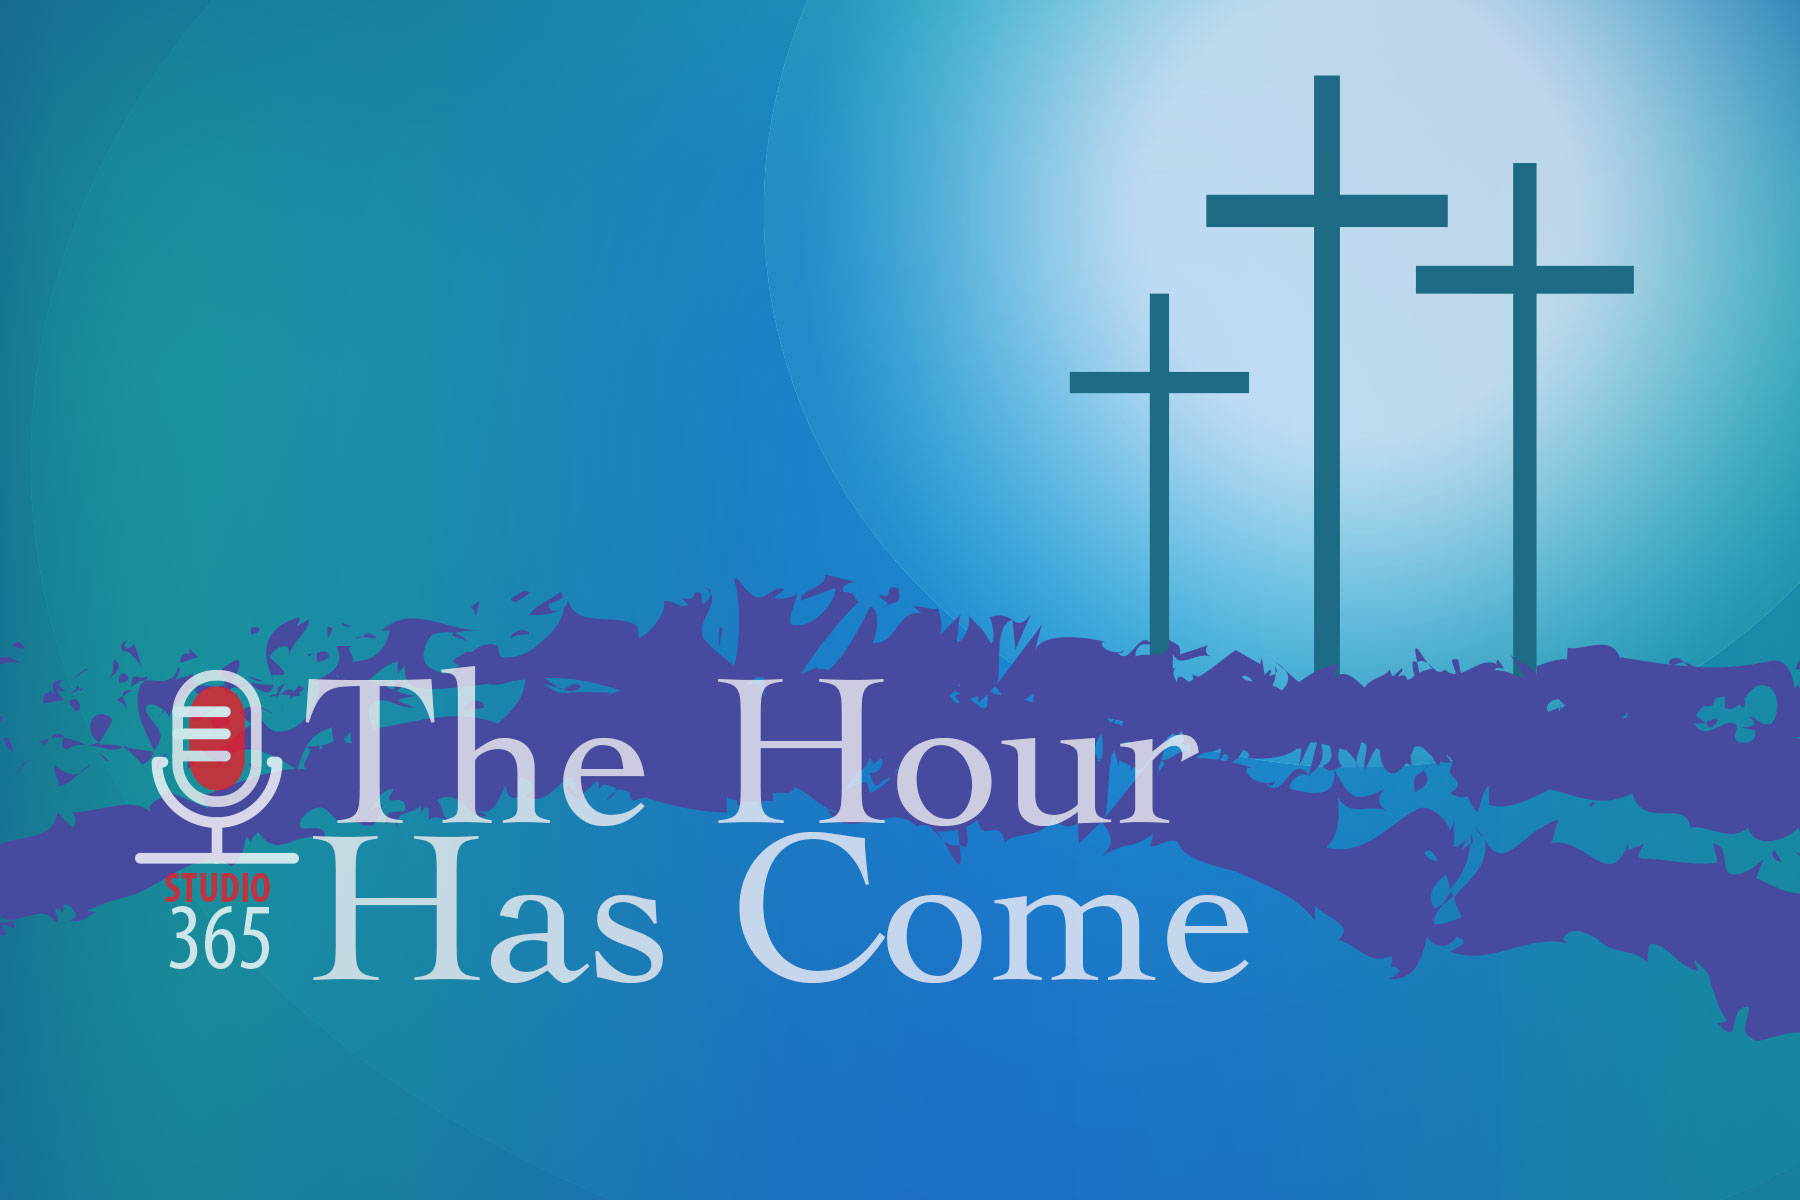 029. The Hour Has Come. Sunday: Easter